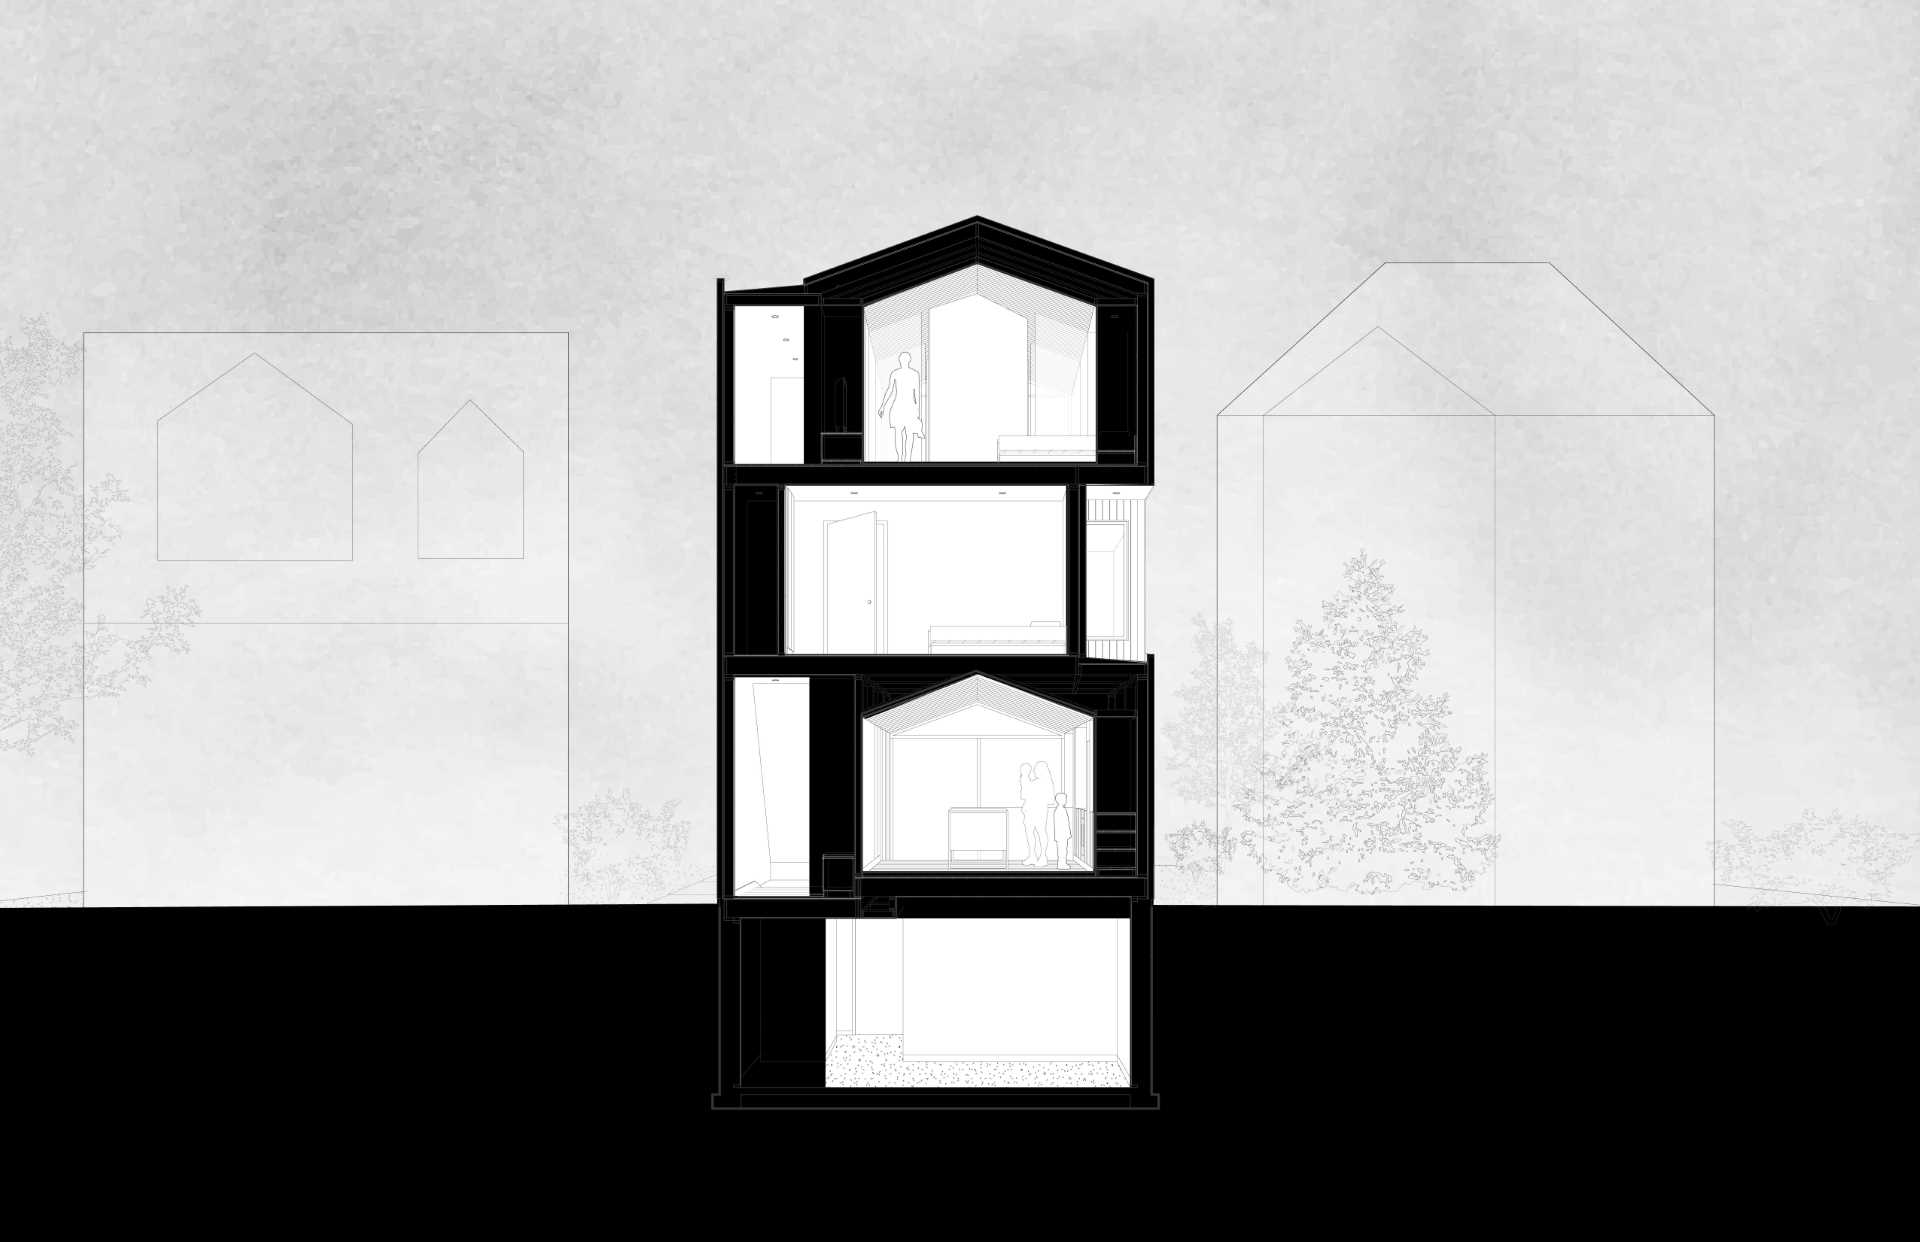 The architectural drawing for a modern home.